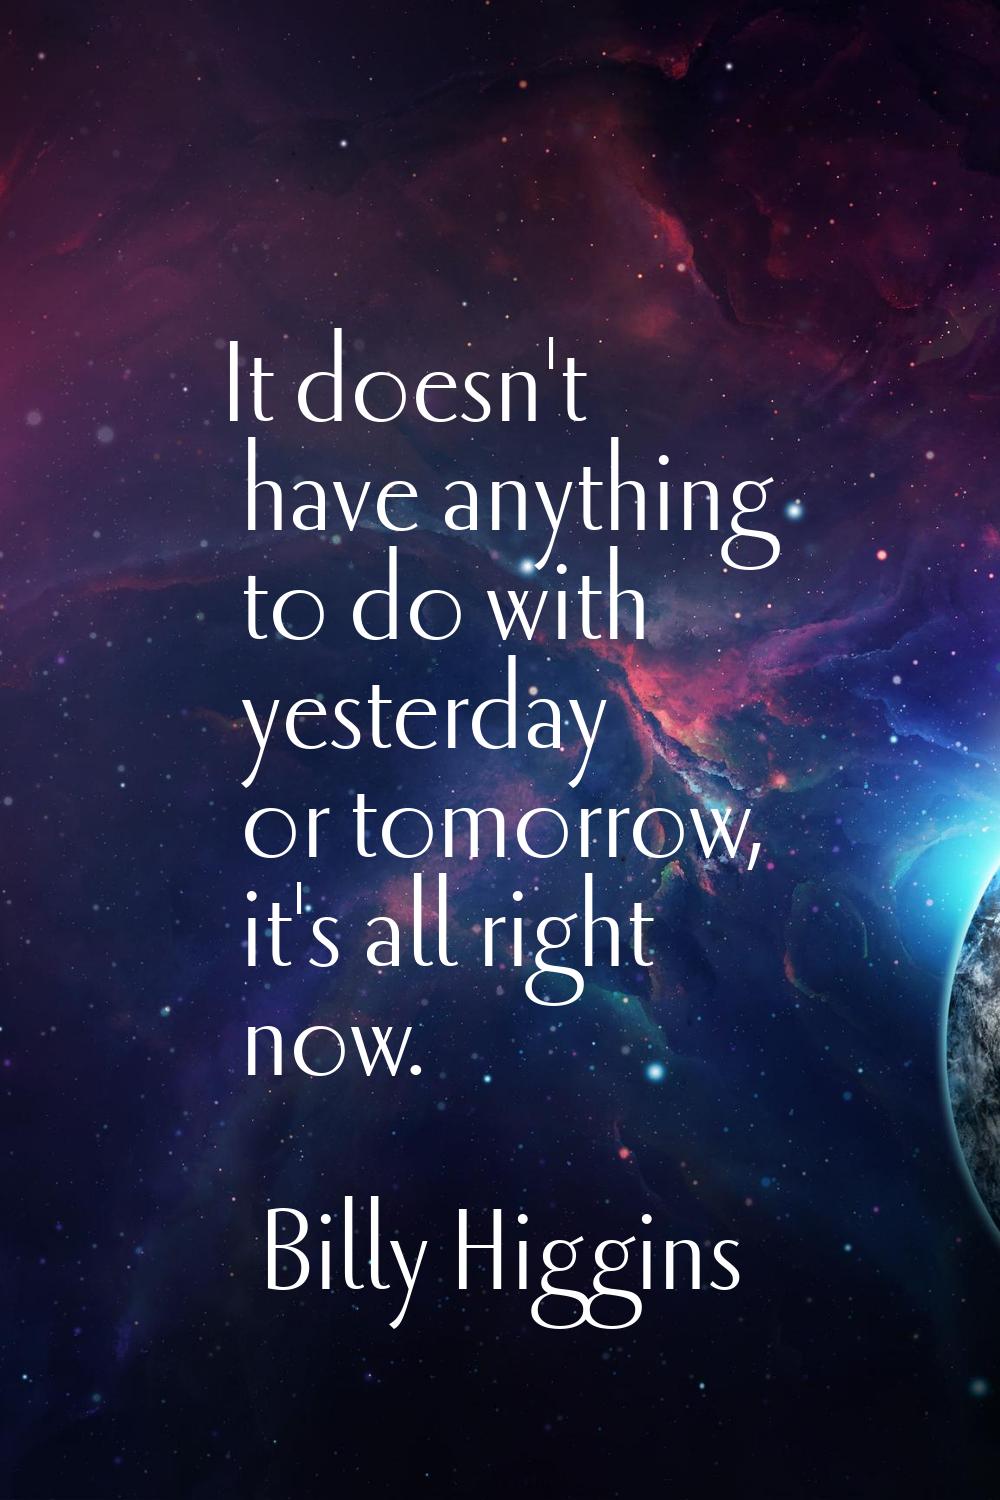 It doesn't have anything to do with yesterday or tomorrow, it's all right now.